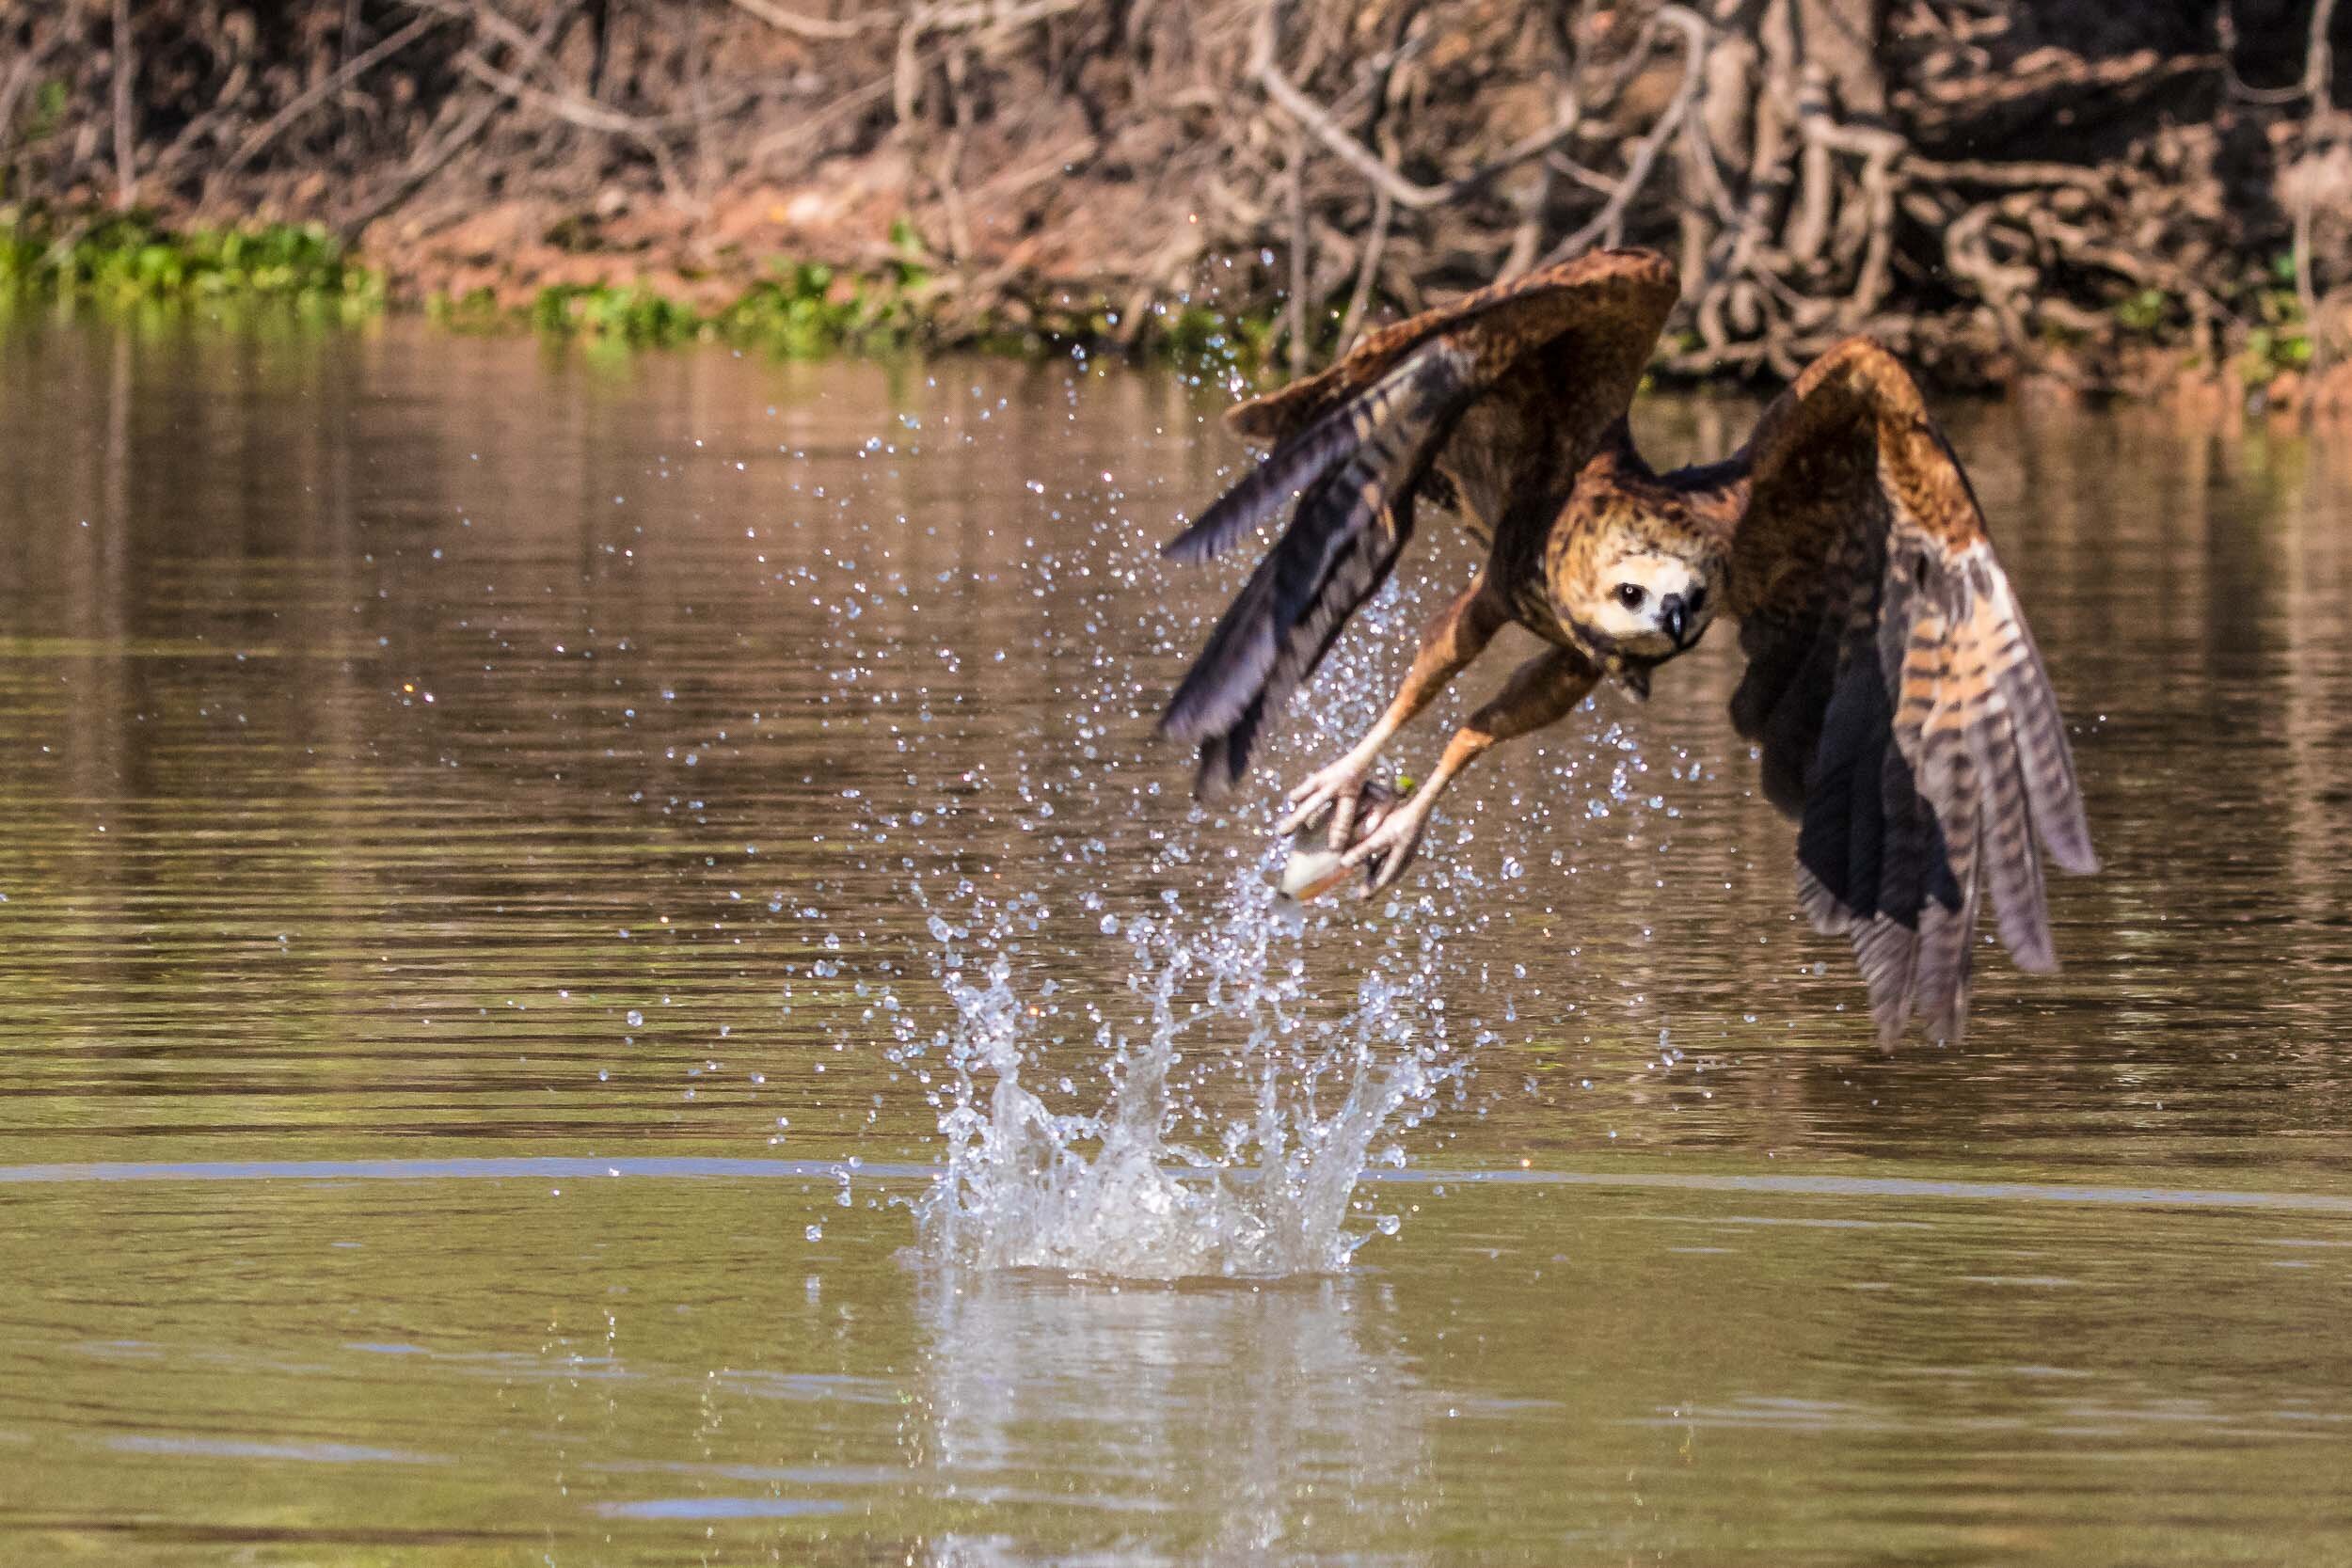 Black collared hawk with fish in its claws, SouthWild Pantanal Lodge, Brazil